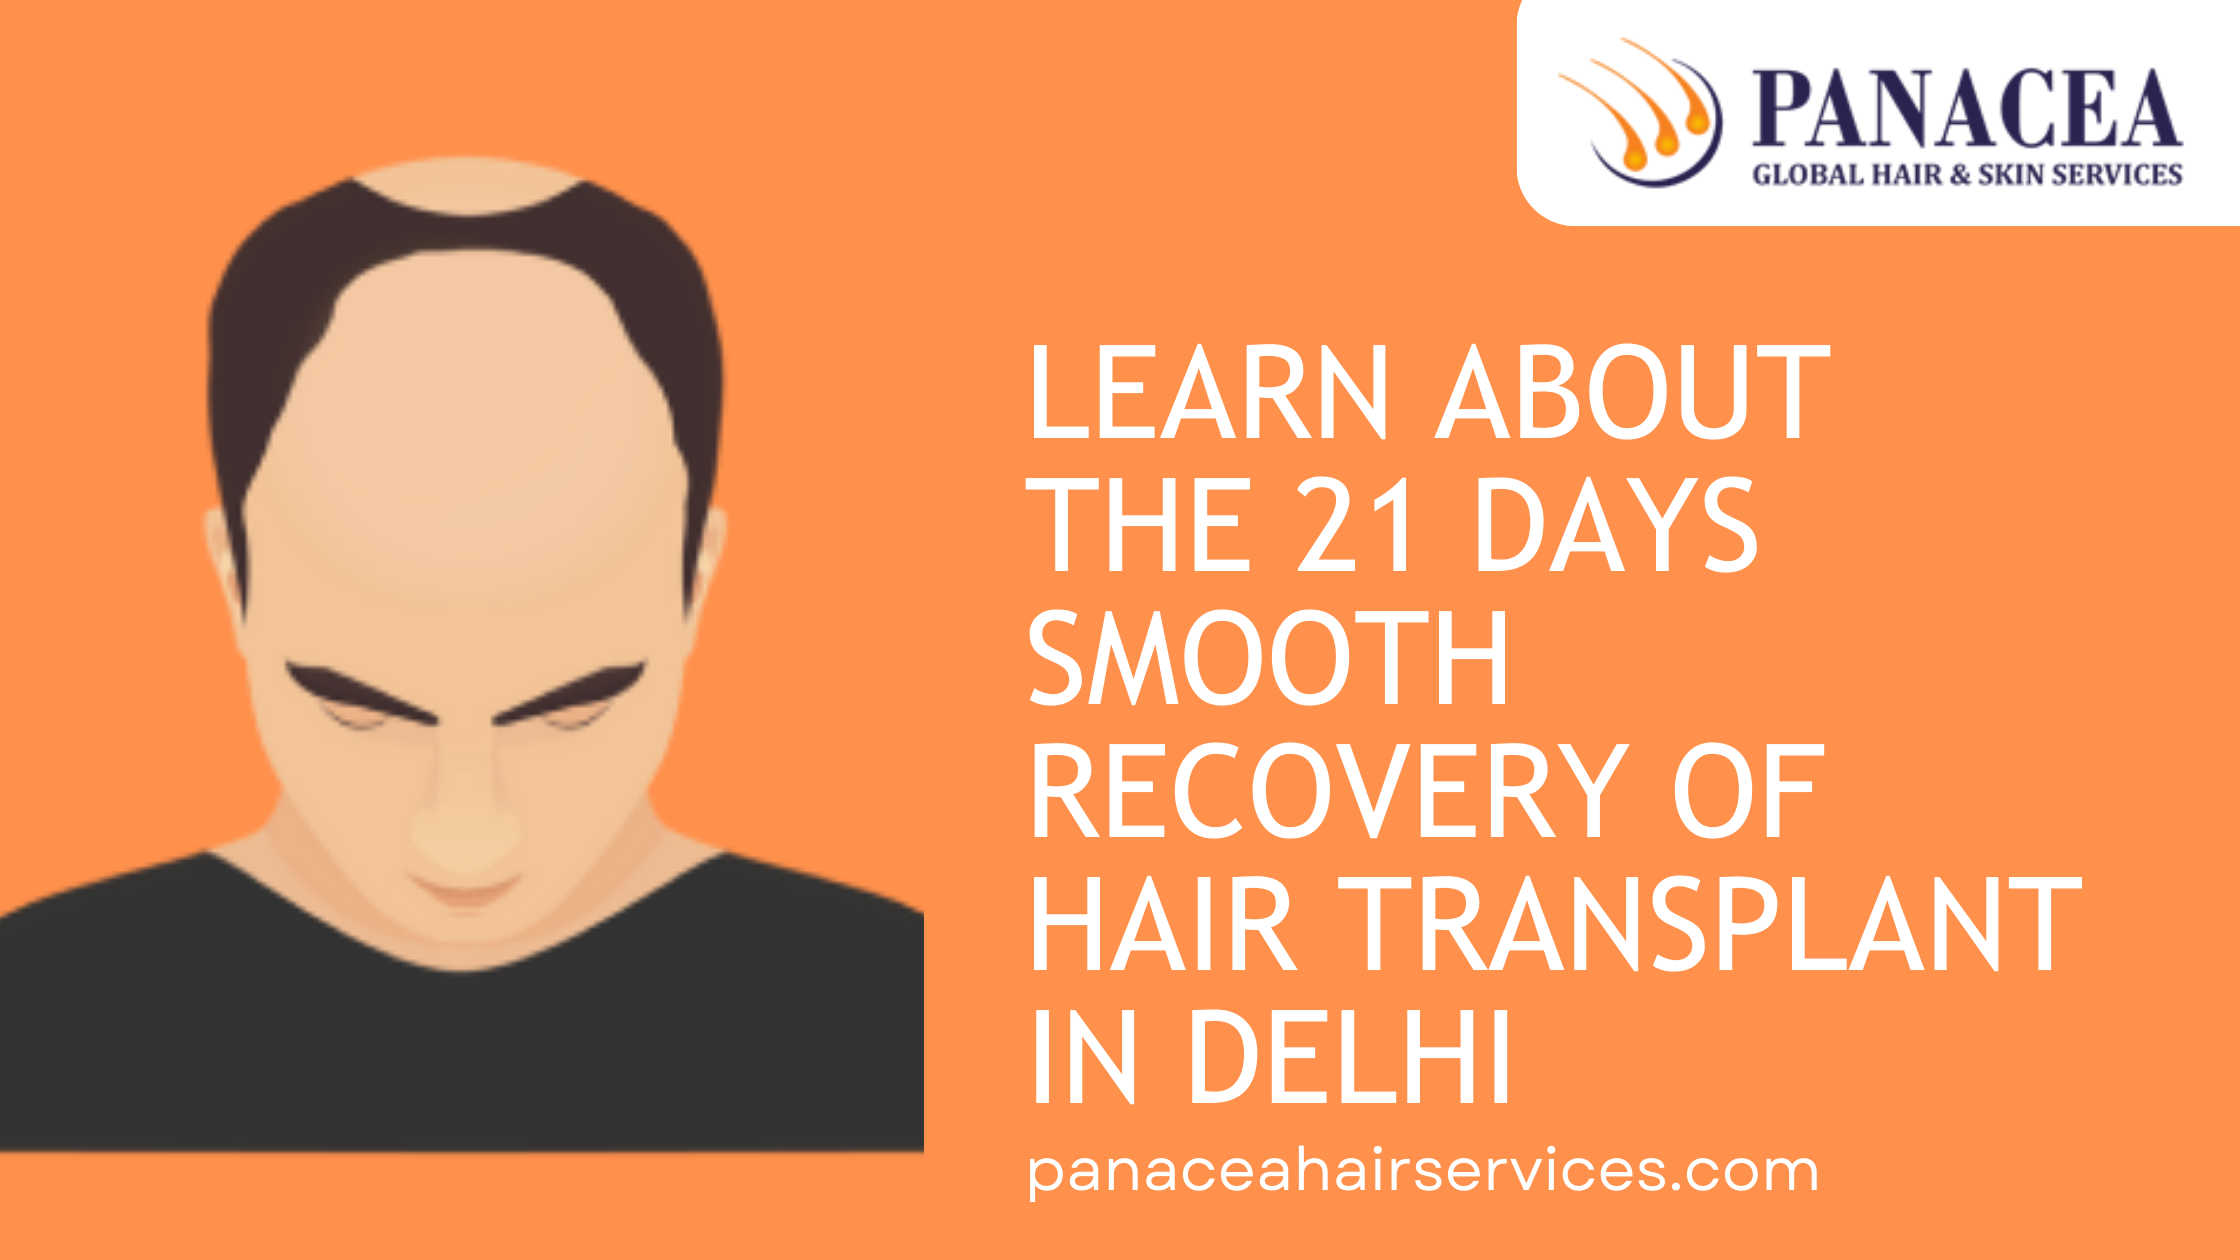 Learn About The 21 Days Smooth Recovery of Hair Transplant in Delhi